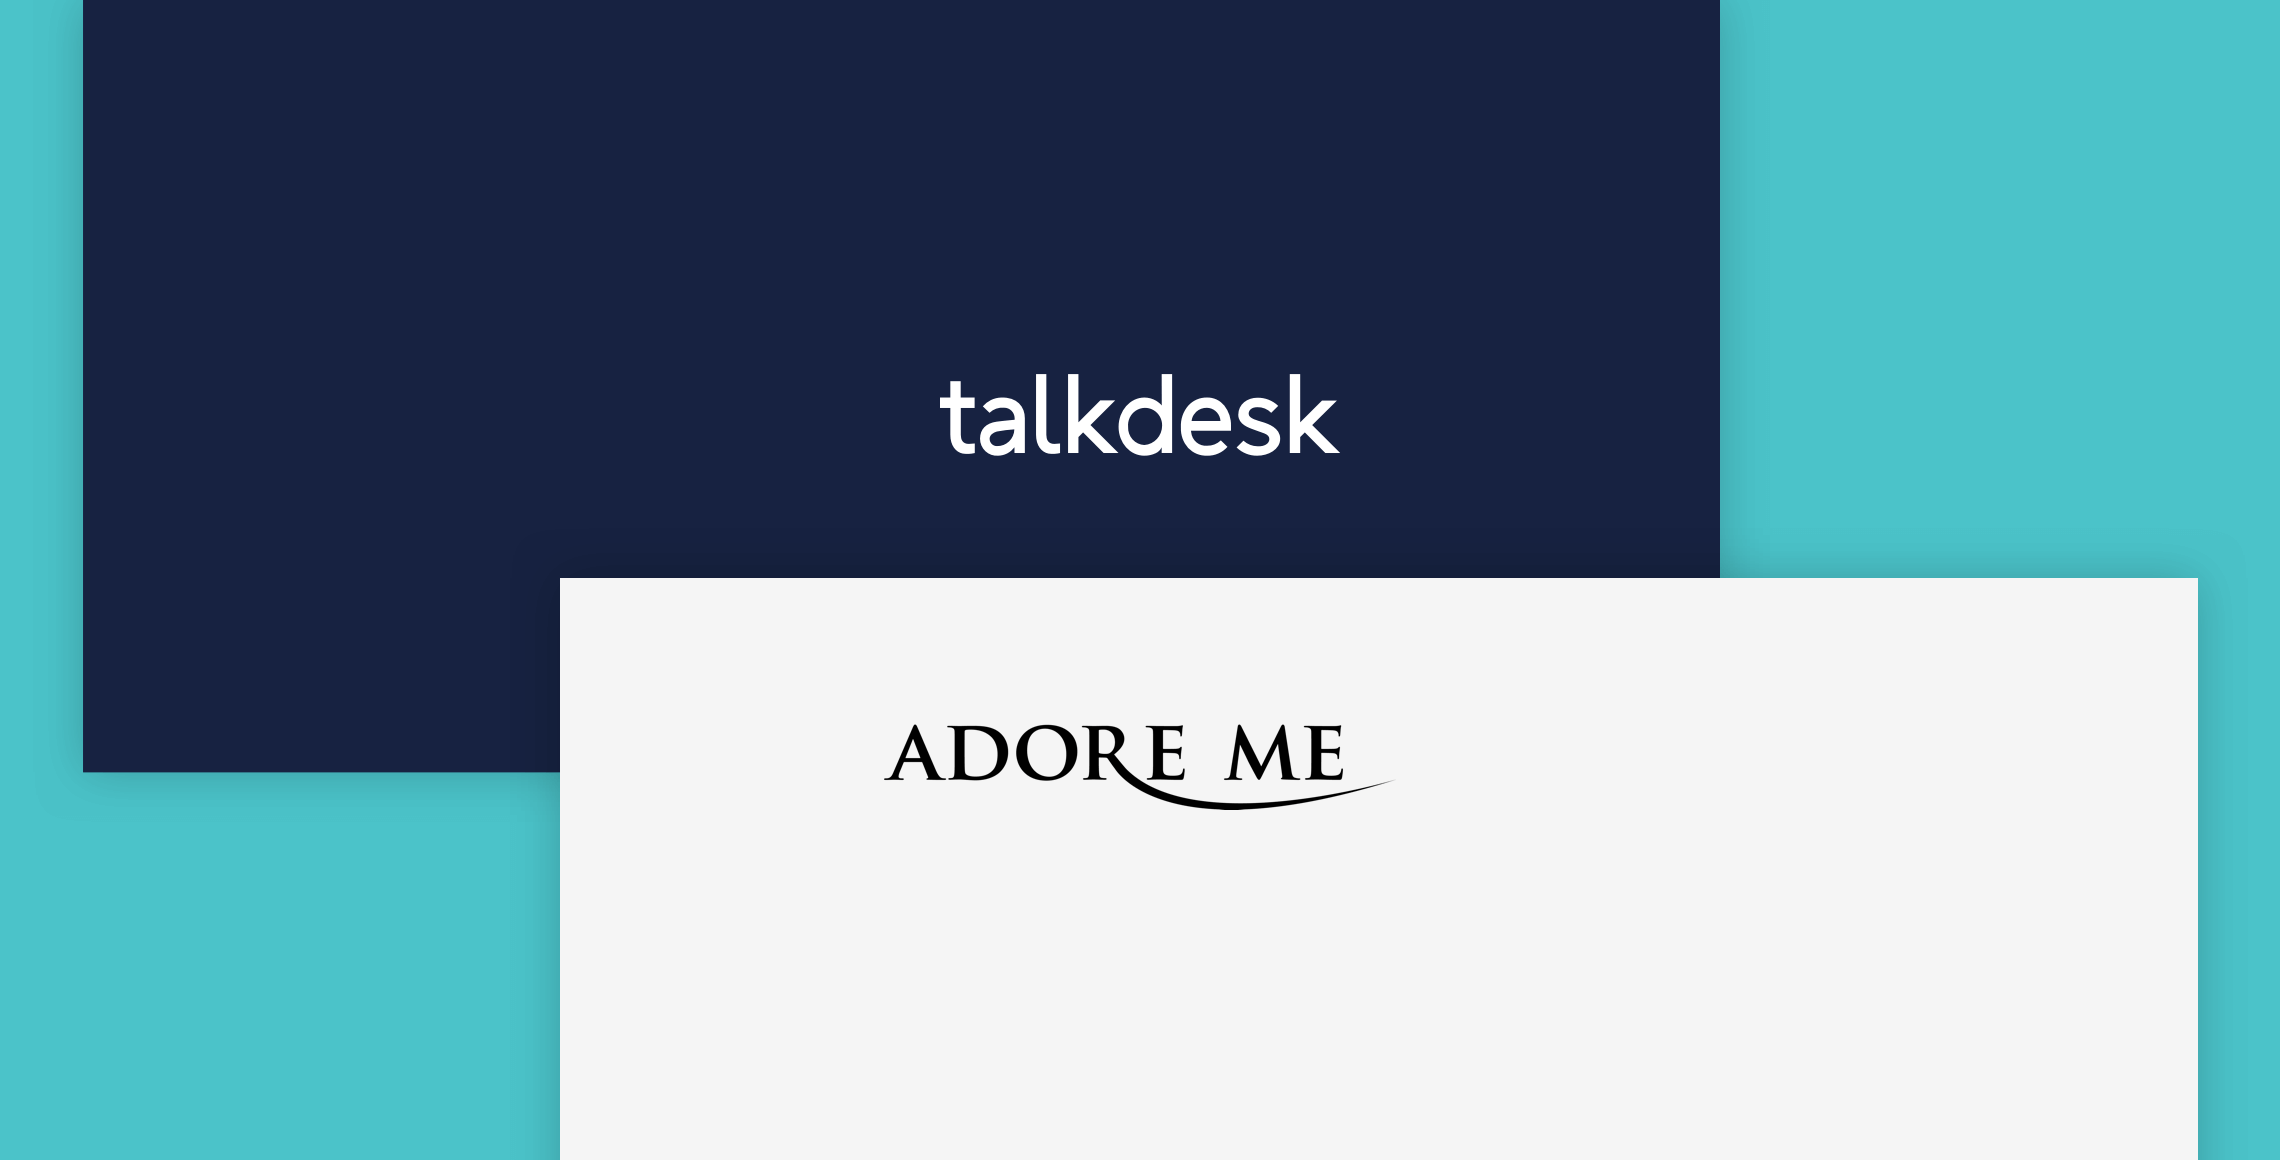 E-commerce lingerie startup Adore Me plans to get into brick and